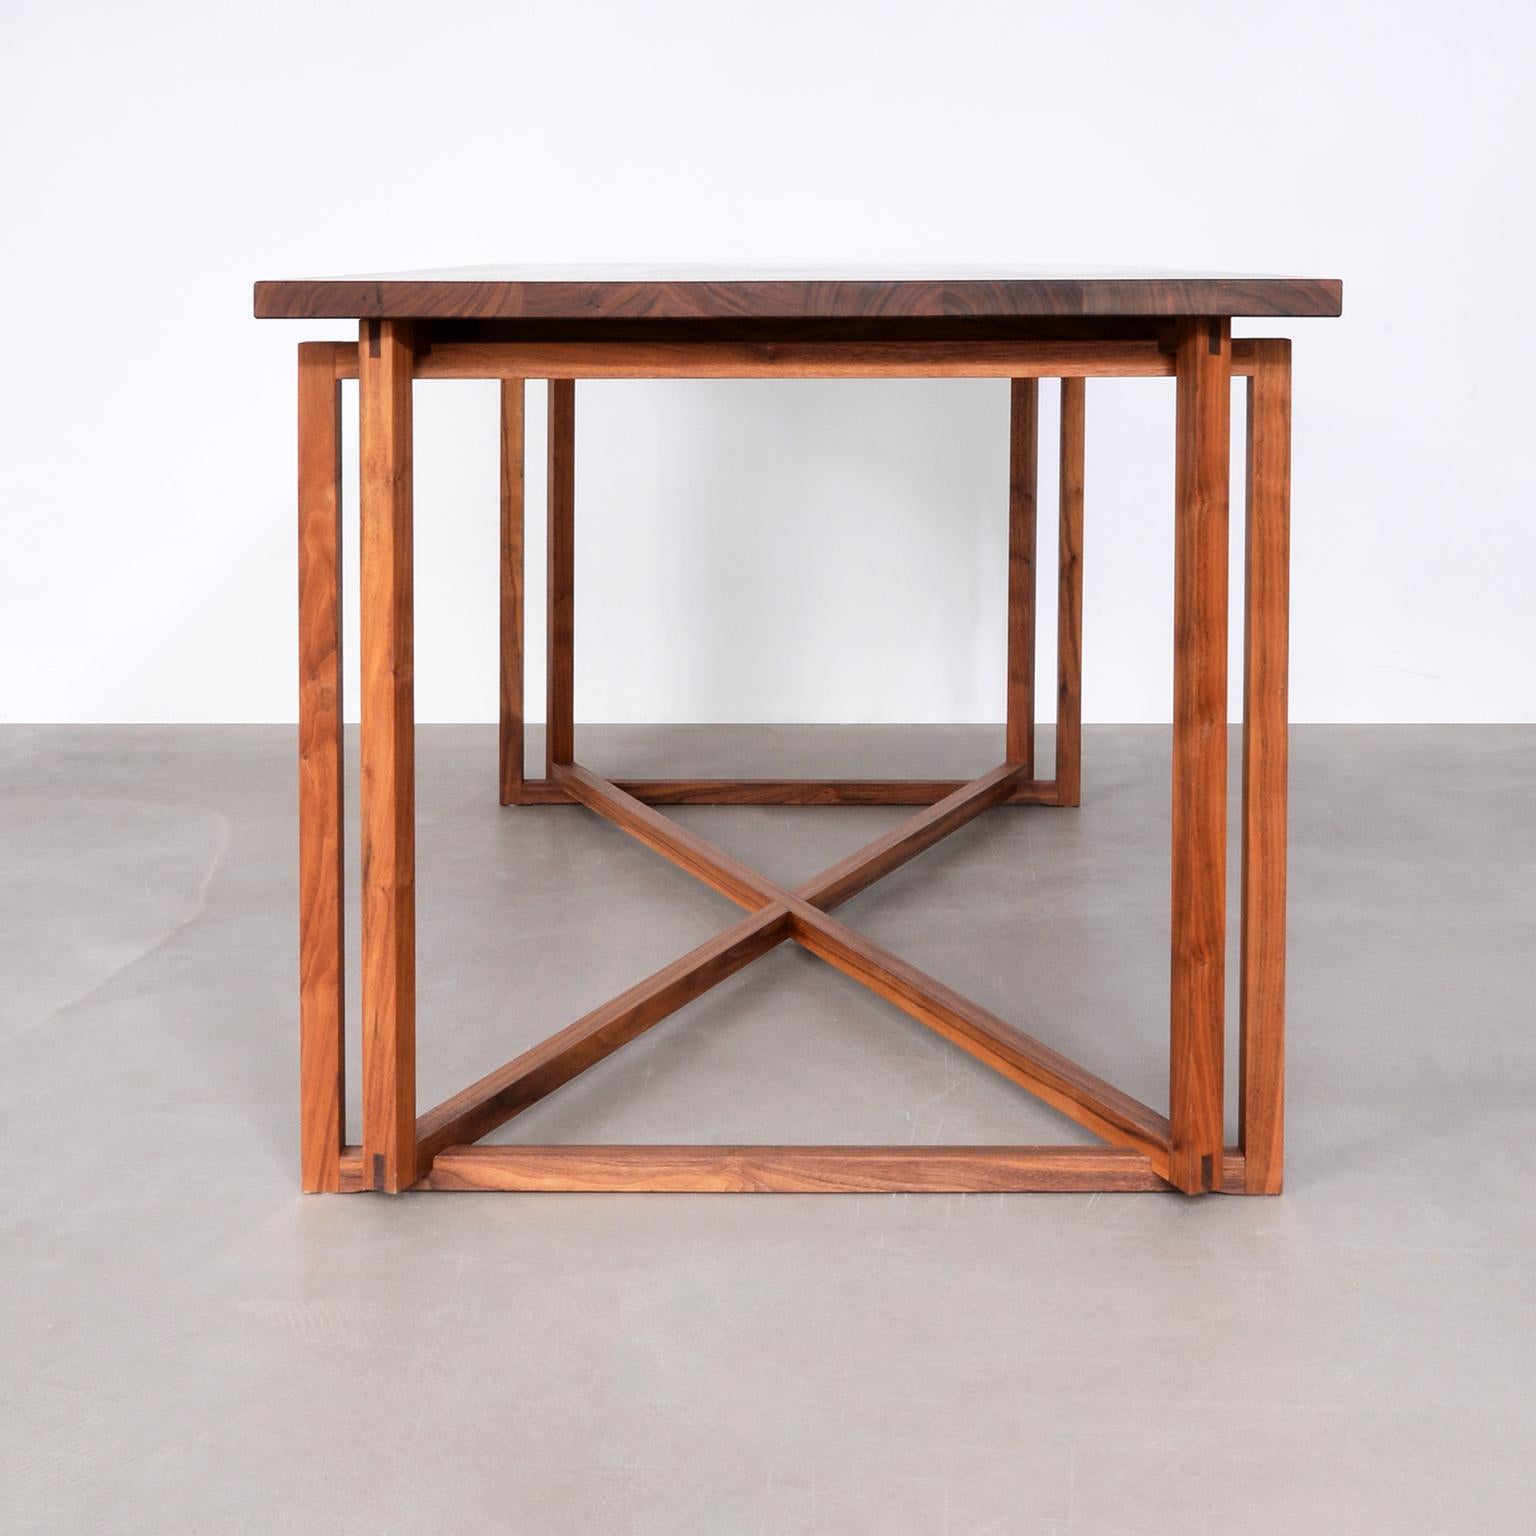 German Unique Hand Crafted Table in Solid Walnut Wood by Laura Maasry, Berlin, 2020 For Sale